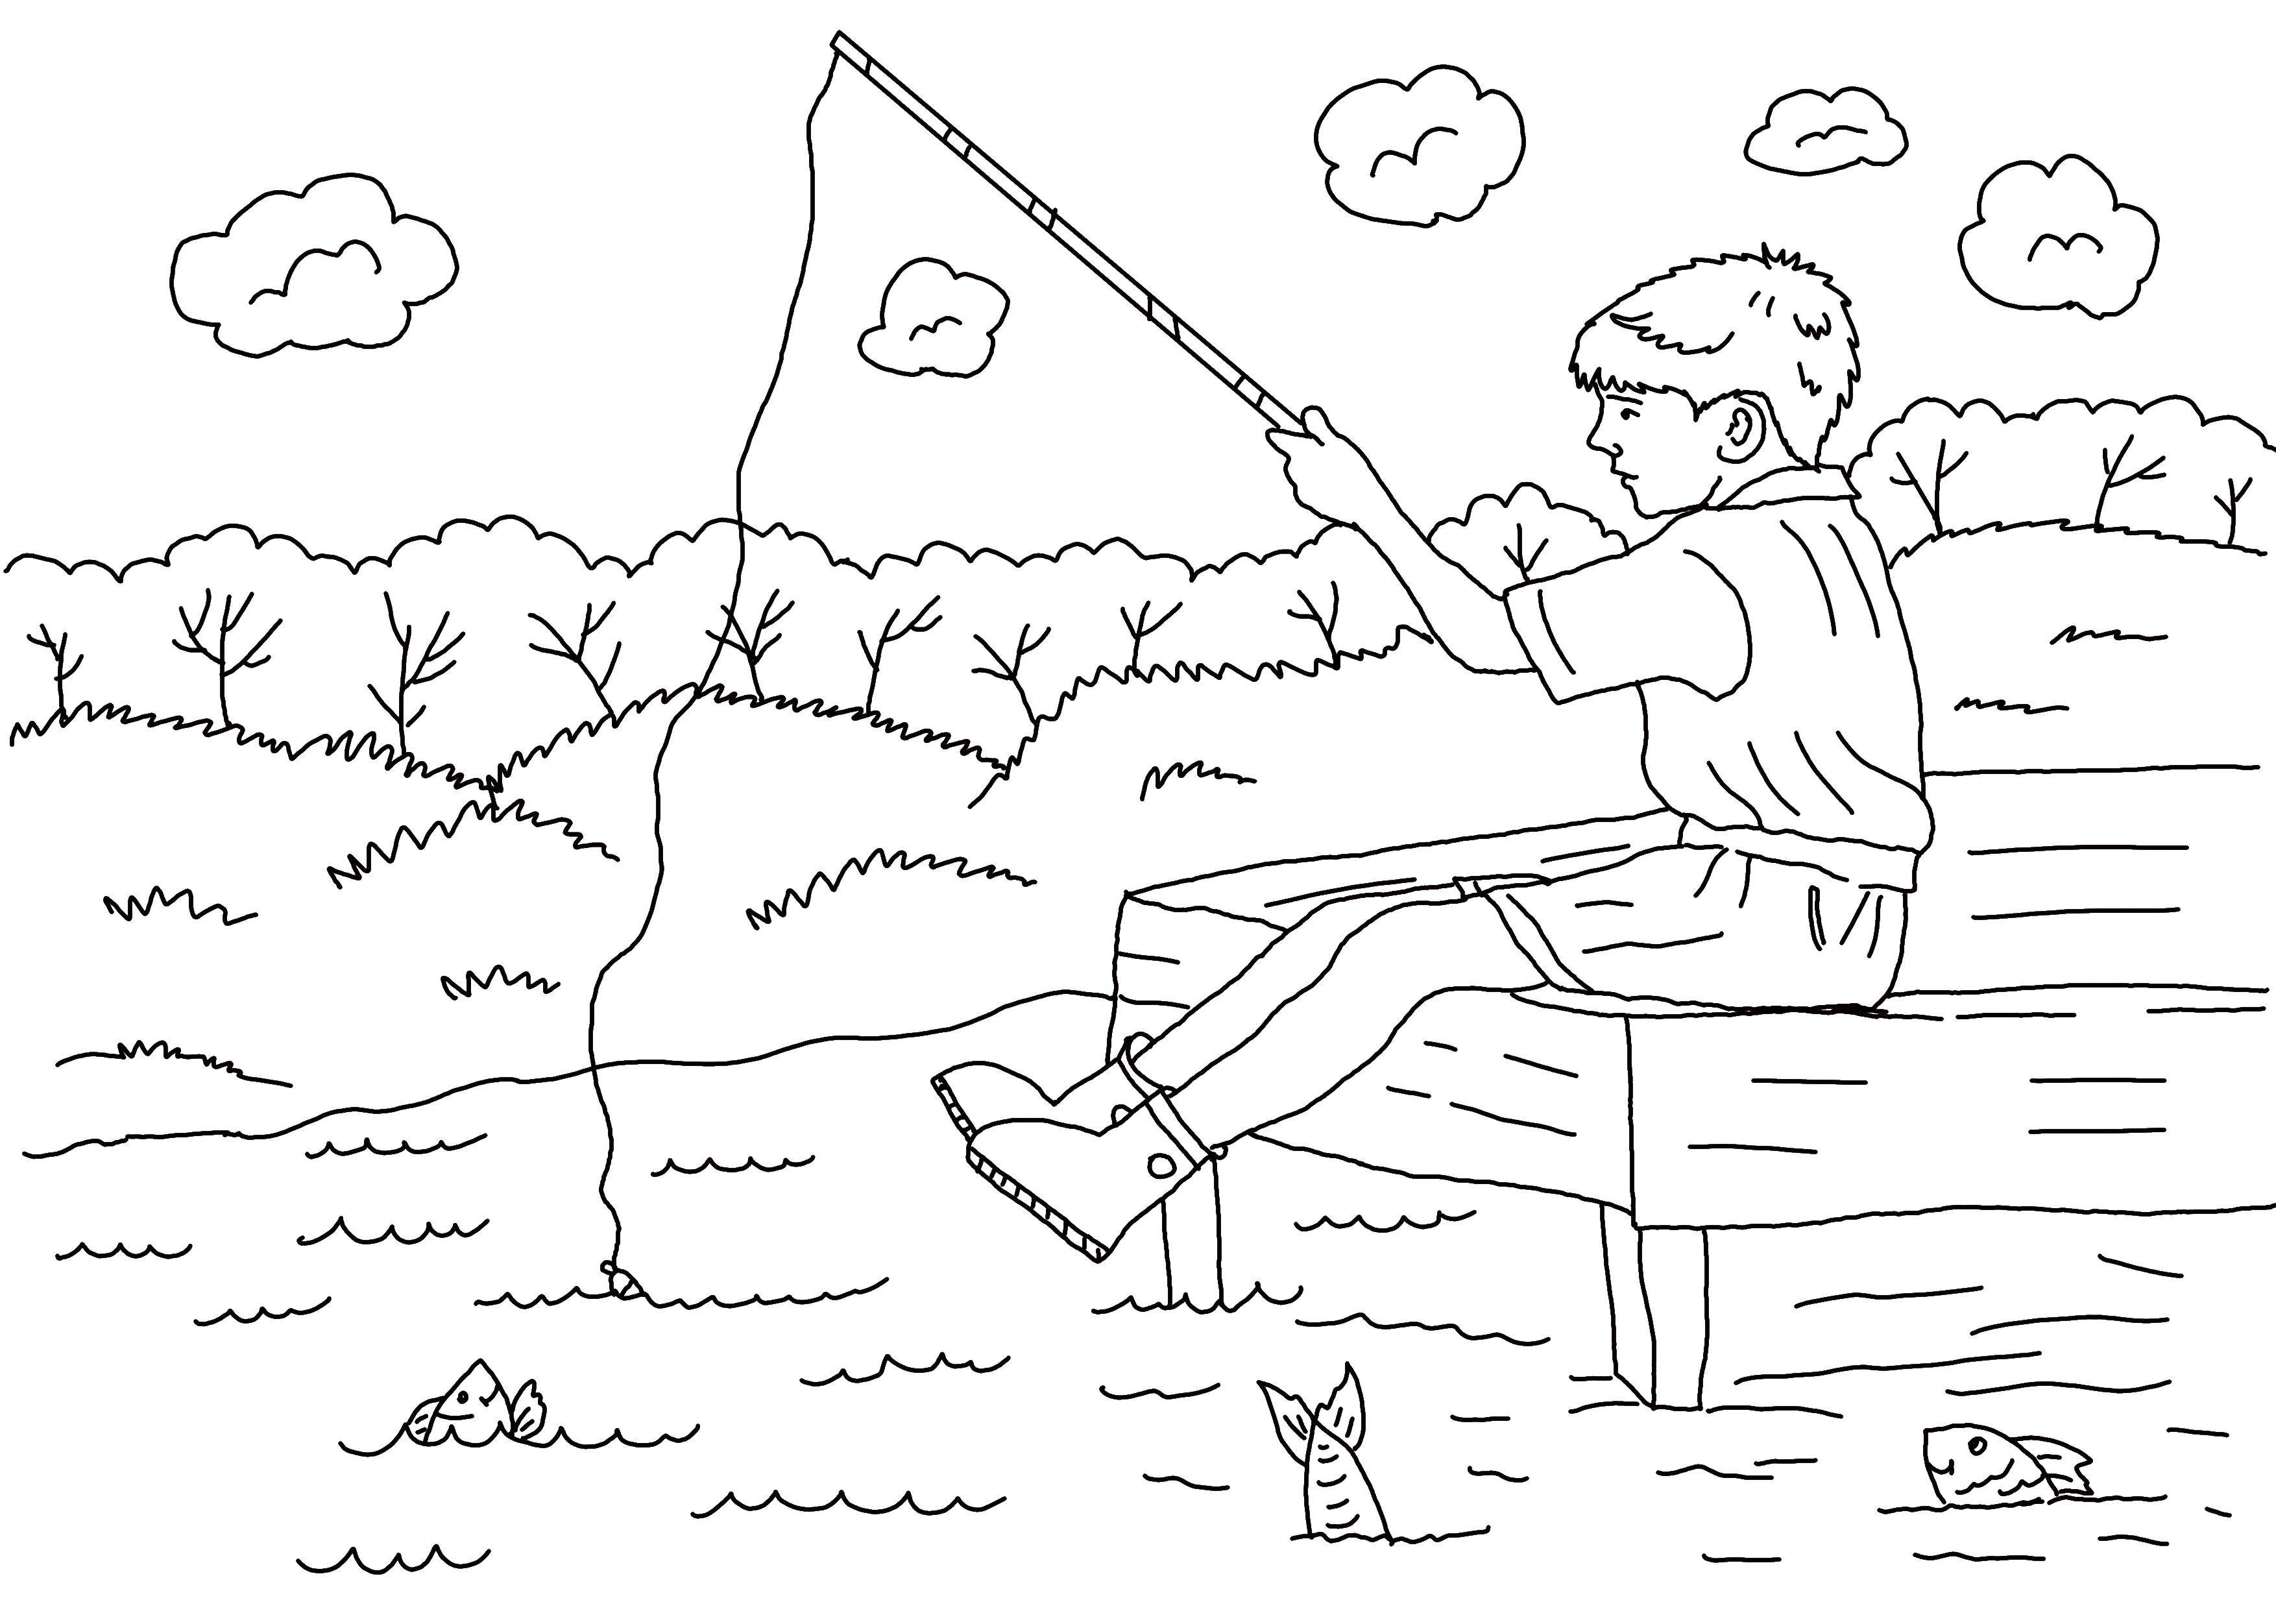 Coloring Boy catches fish in a lake. Category fishing. Tags:  Boy, fishing.